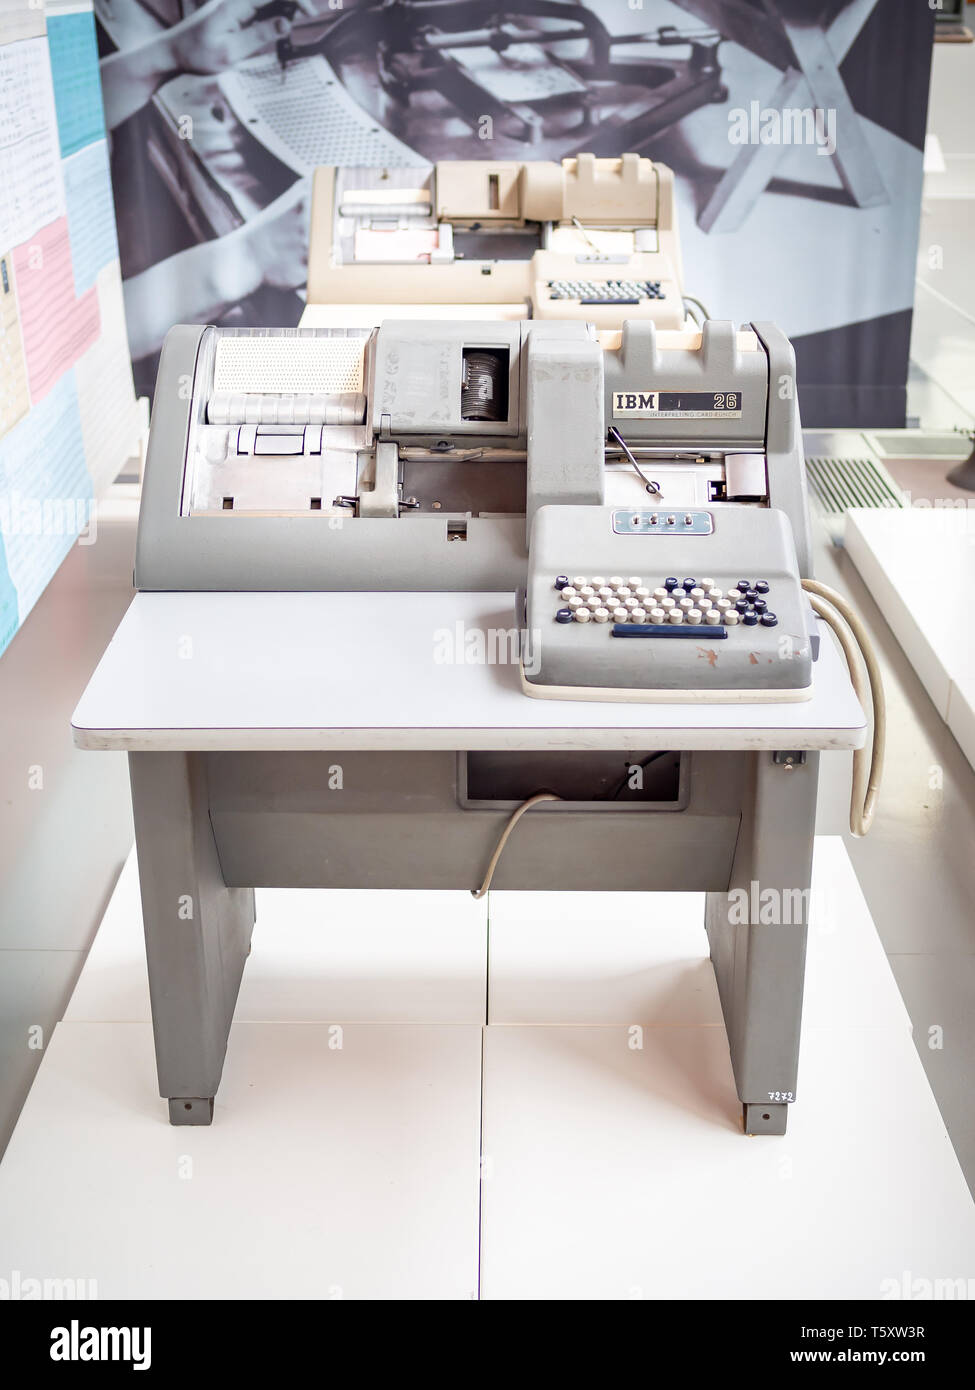 TERRASSA, SPAIN-MARCH 19, 2019: IBM 26 interpreting card punch/key punch in the National Museum of Science and Technology of Catalonia Stock Photo